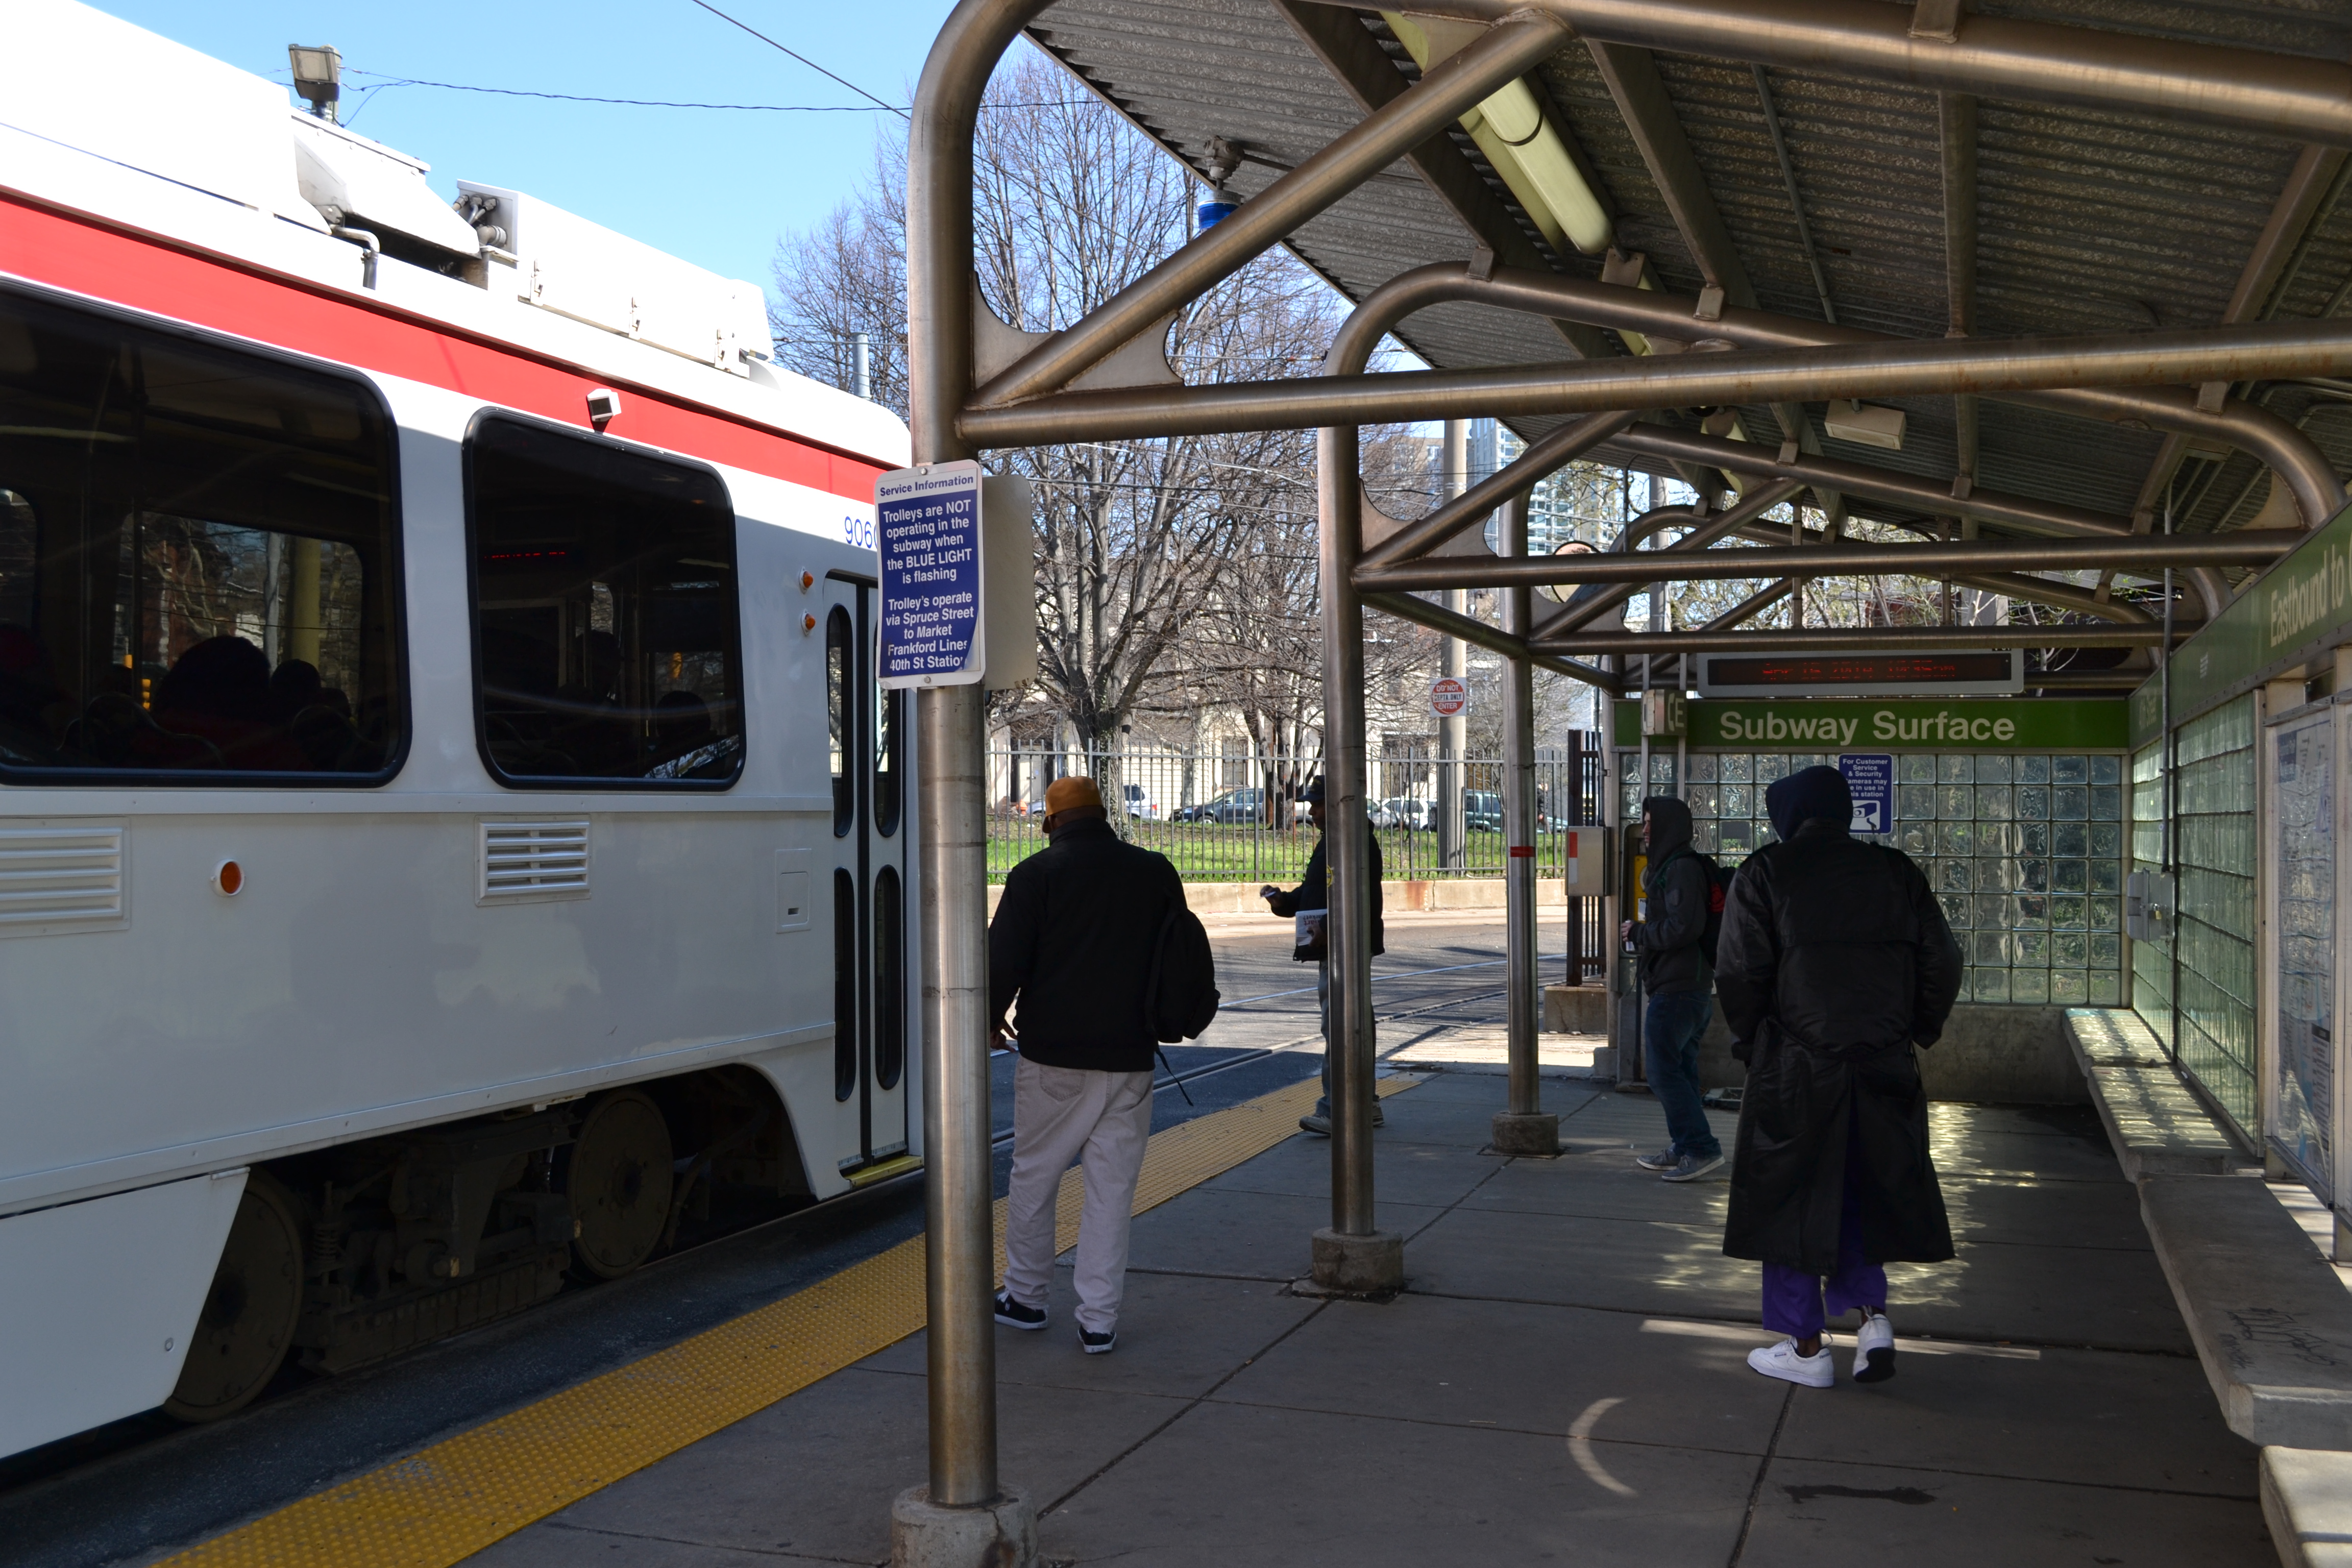 According to UCD, the station is SEPTA's busiest at-grade train station in Philadelphia